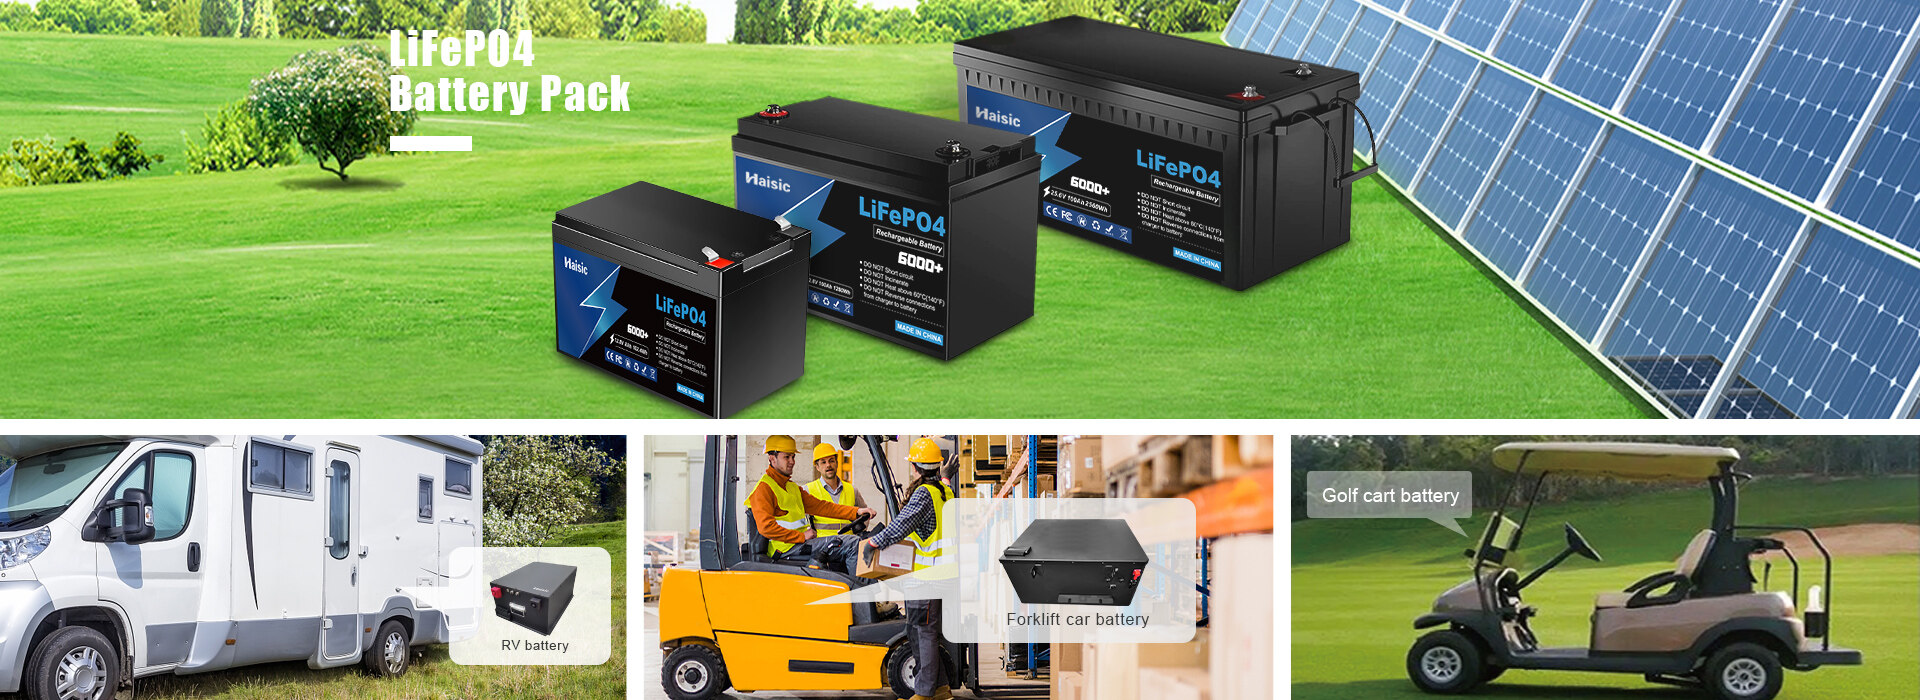 lifepo4 battery for RV